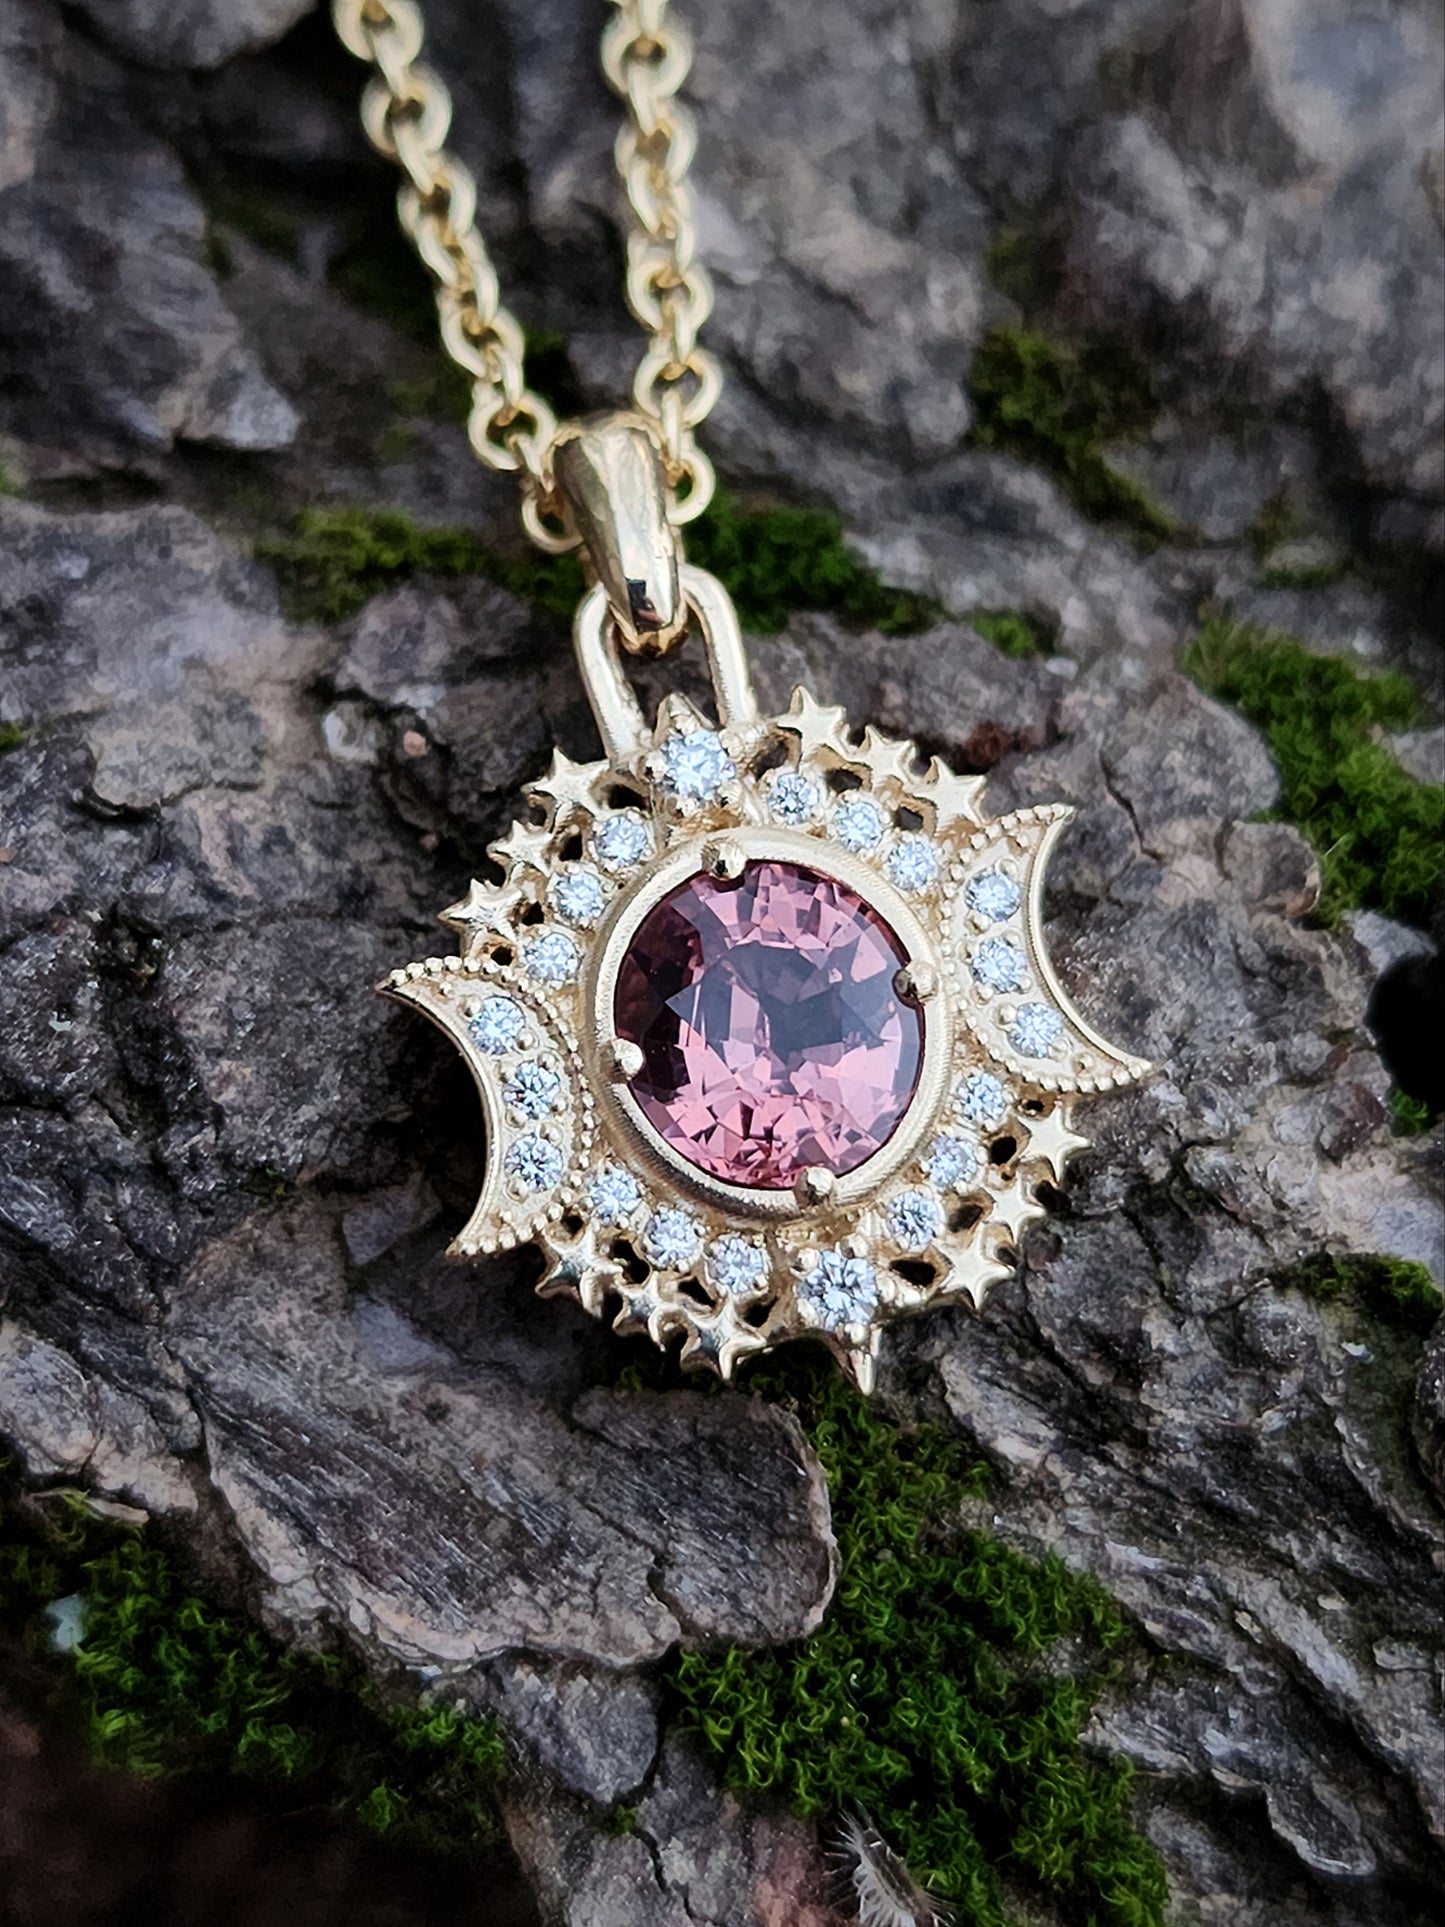 Ready to Ship - Serena Moon and Star Pendant with Pink Spinel & Diamonds - 14k Yellow Gold - Celestial Valentines Gift